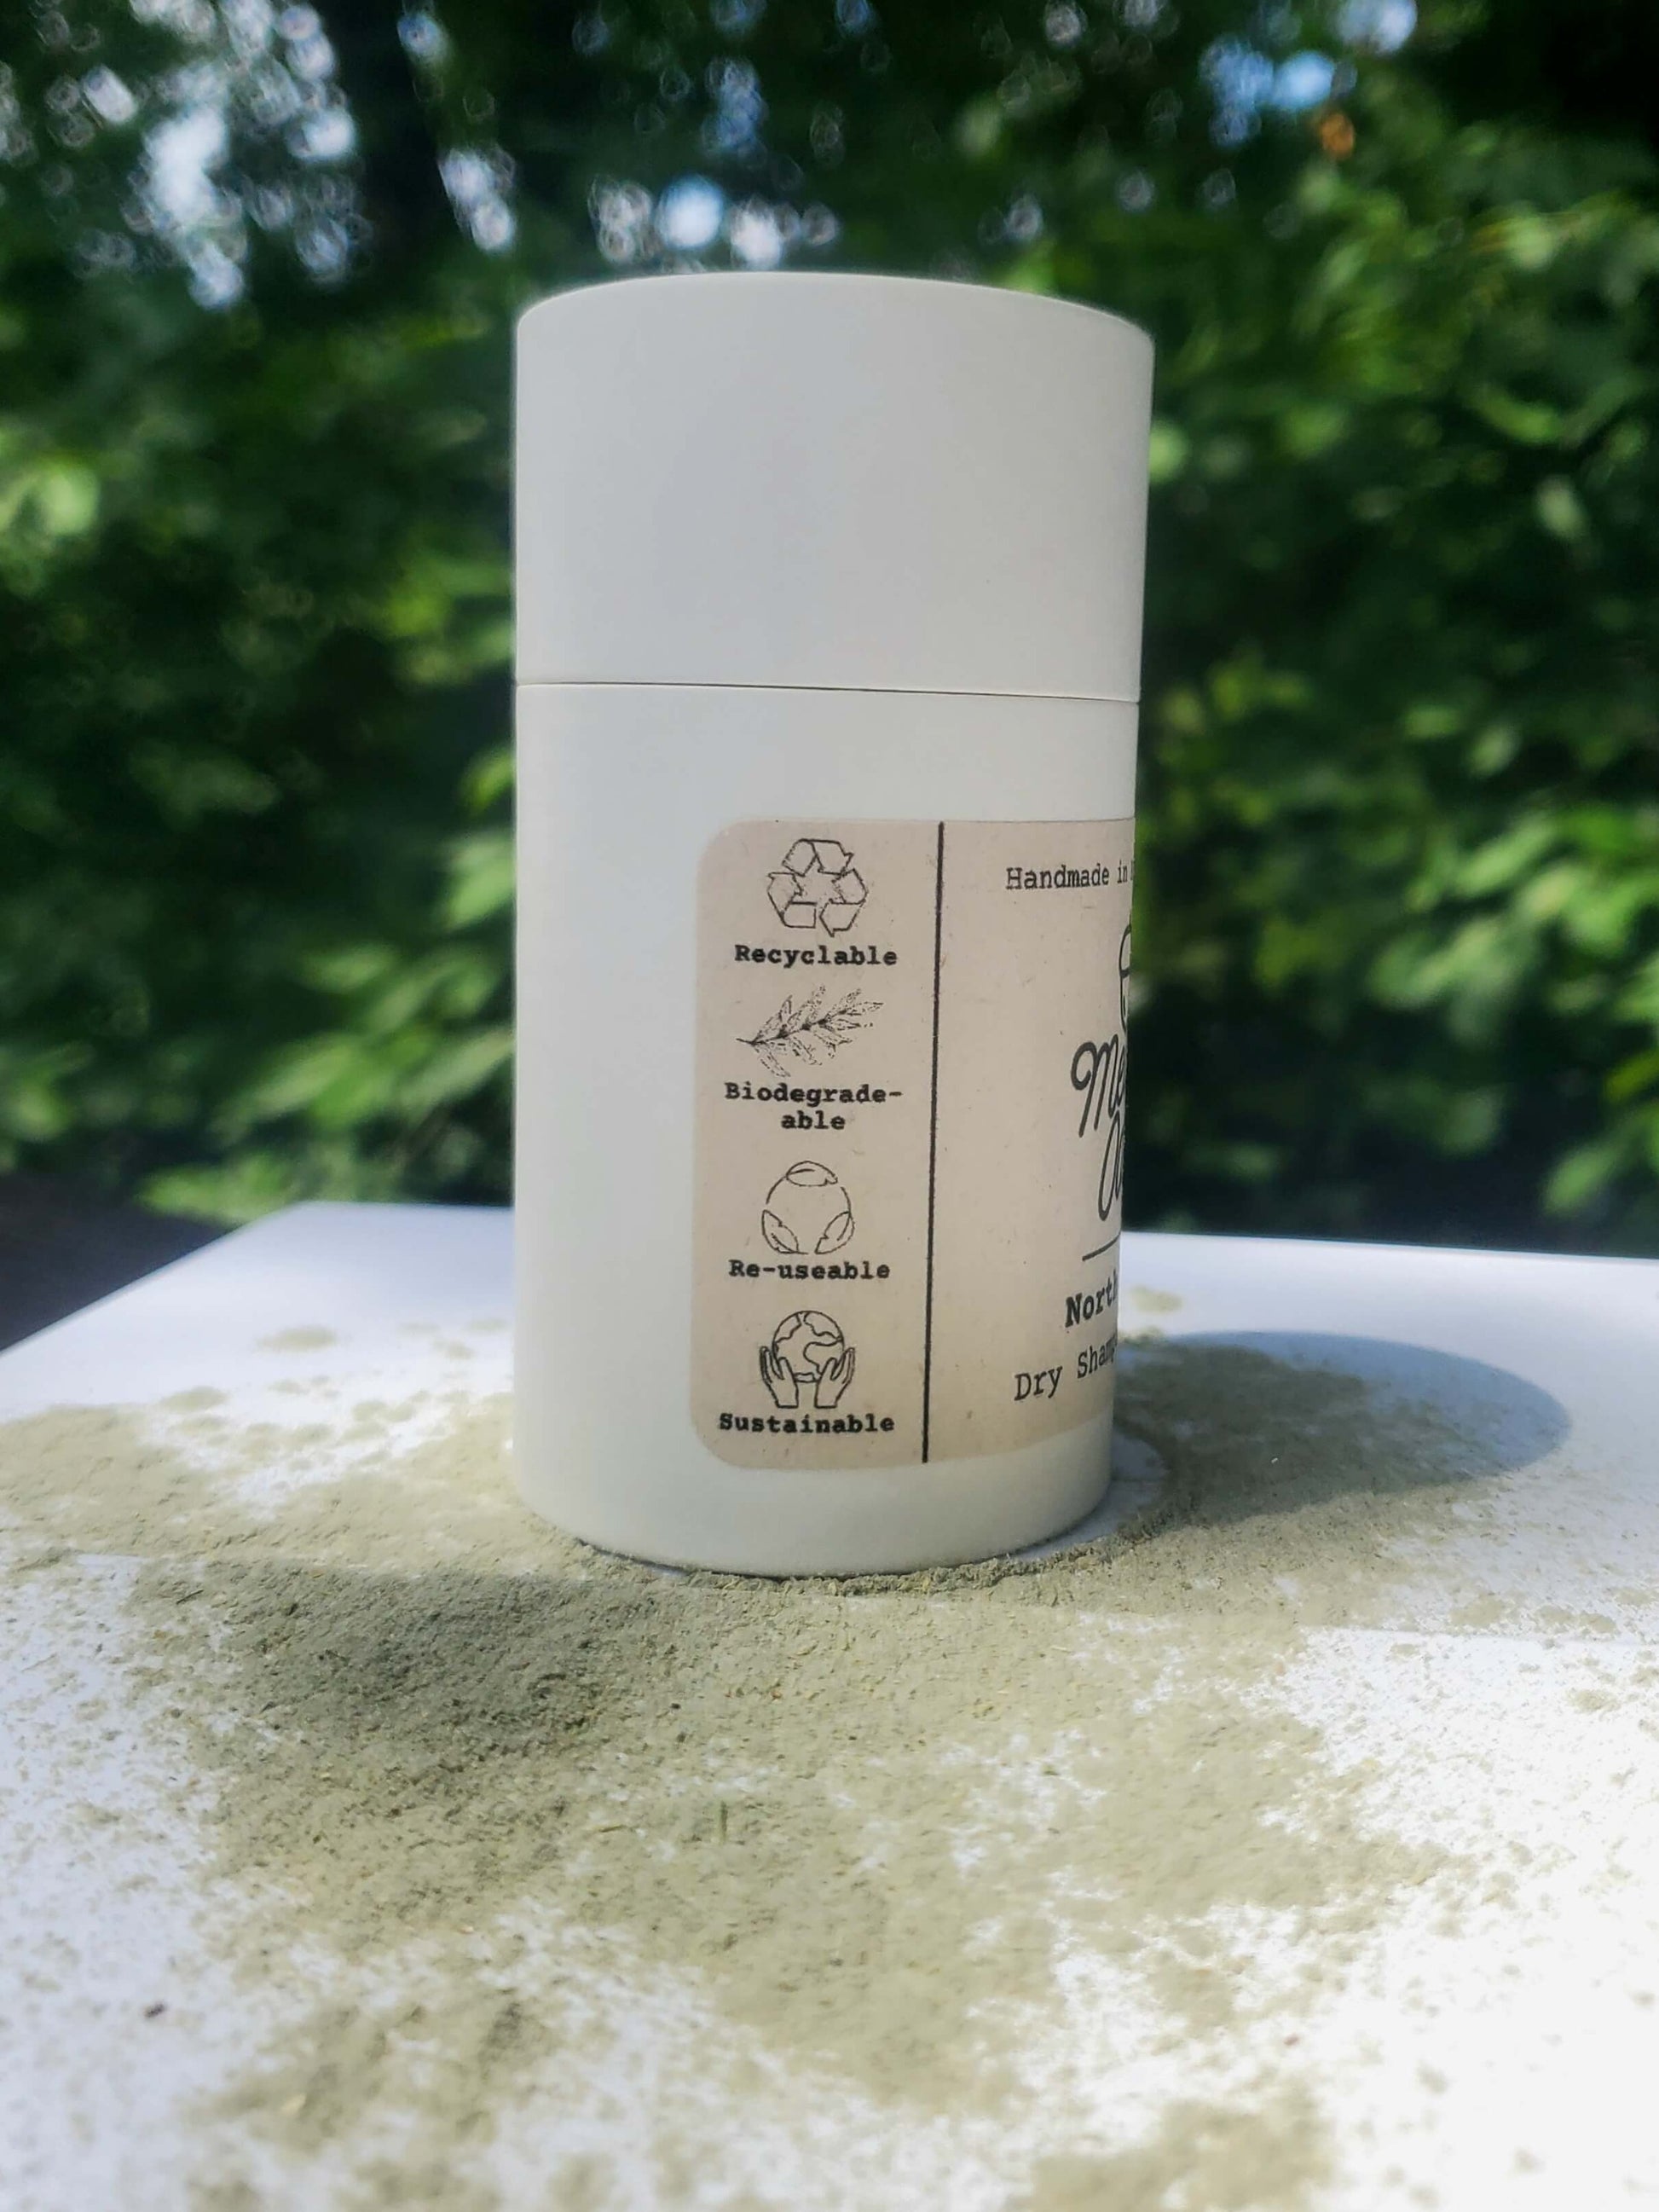 Organic dry shampoo packed in a recyclable, biodegradable, reusable, and sustainable container